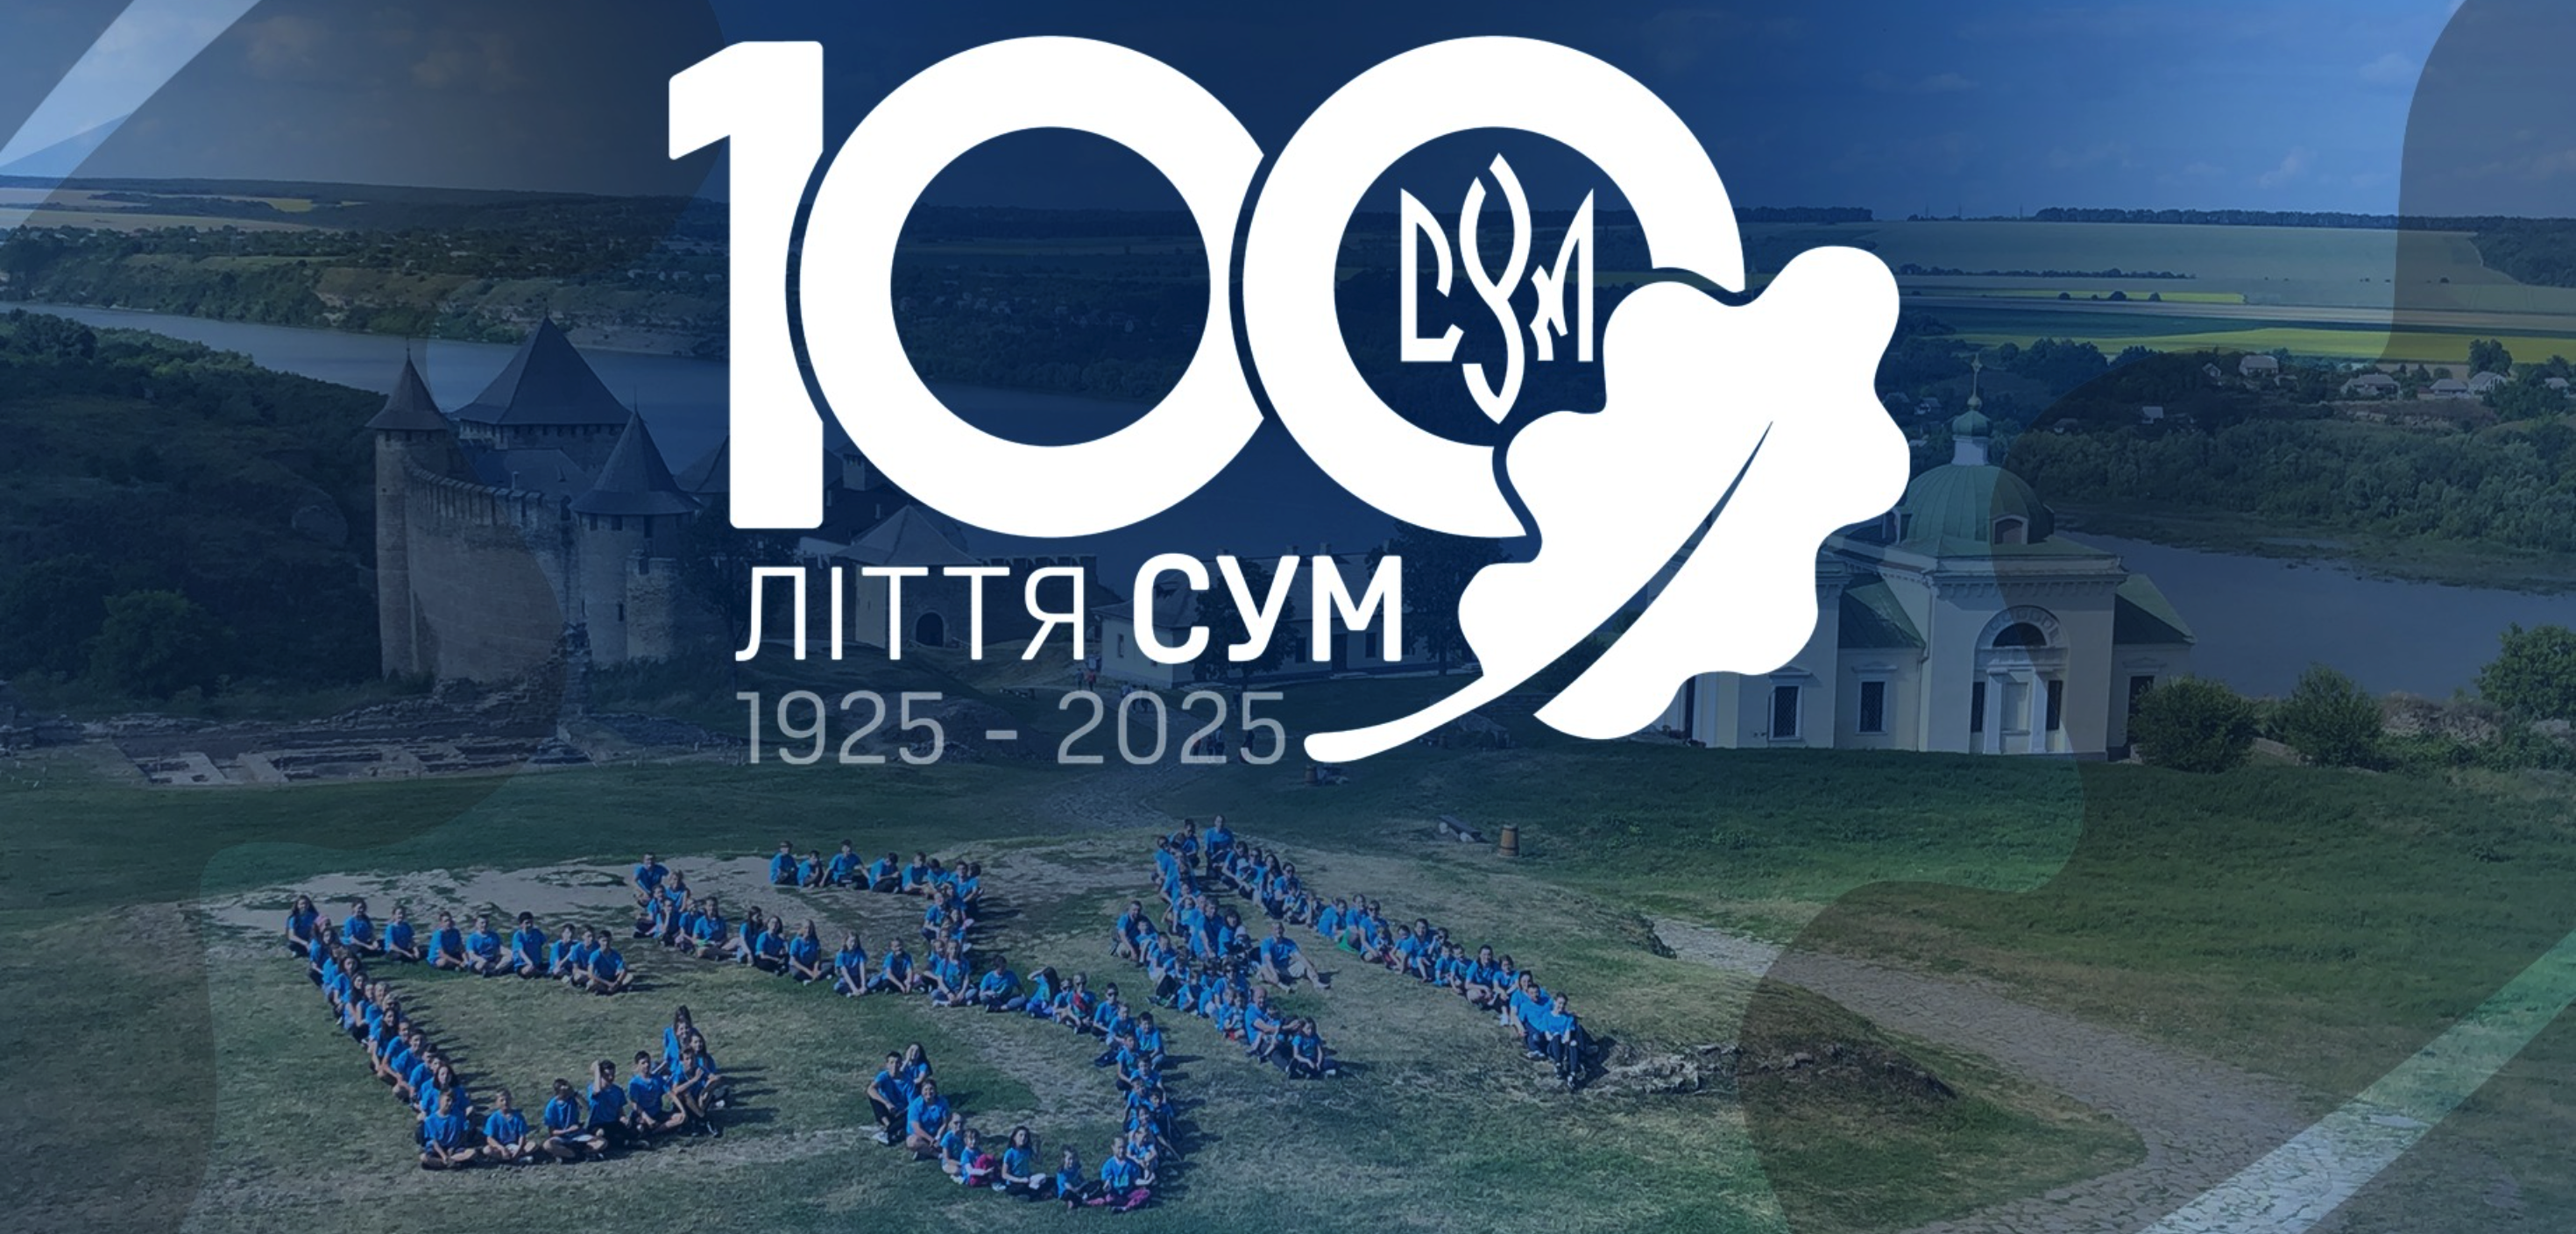 CYM launches competition ahead of 100th anniversary